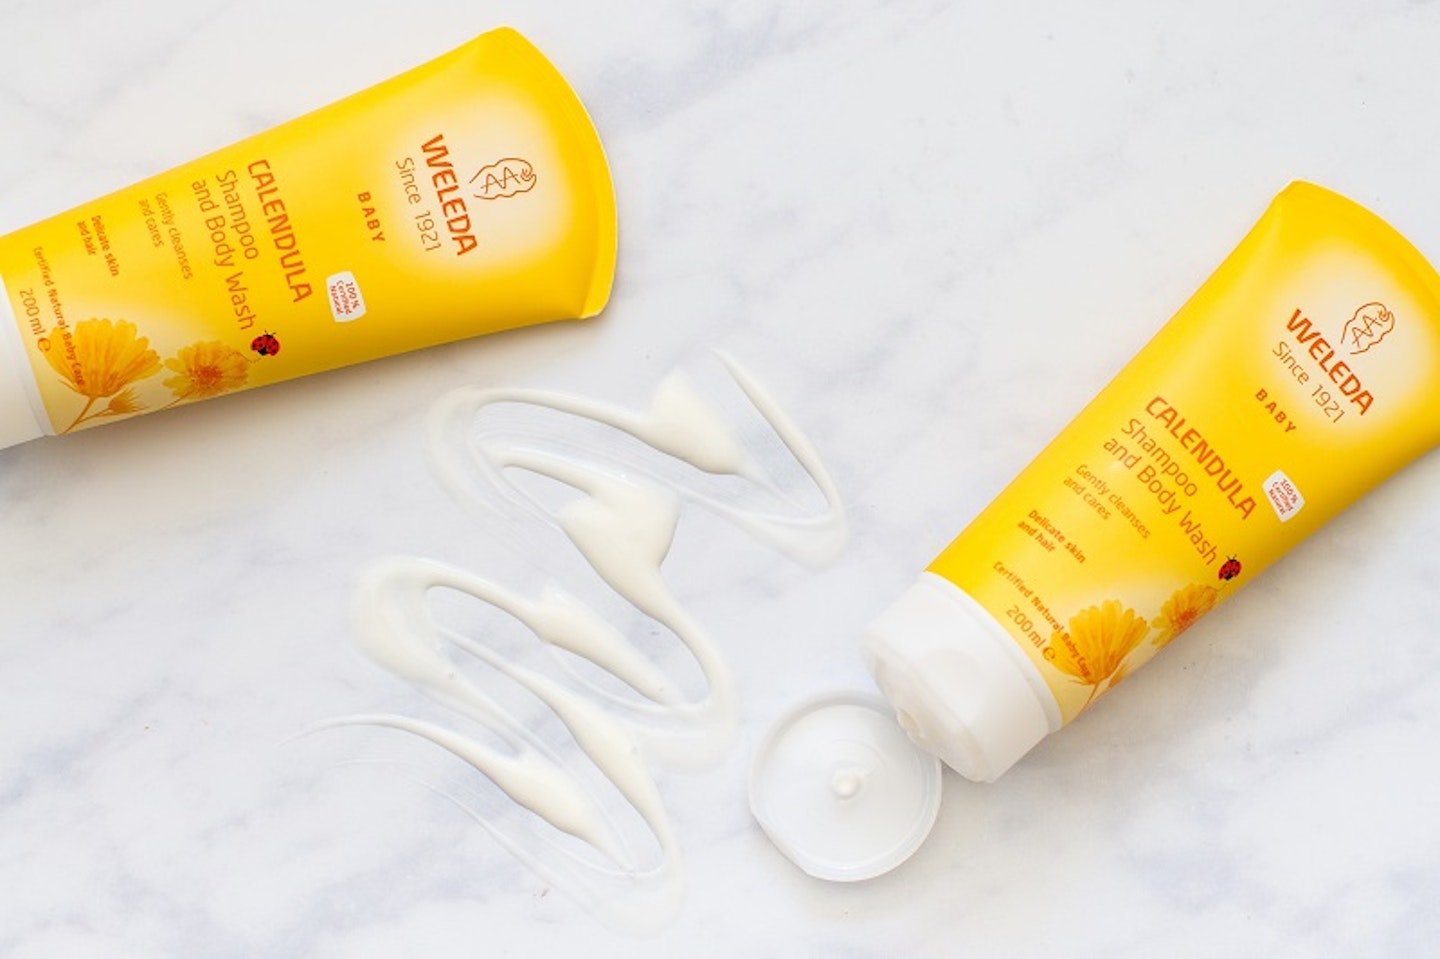 imod mode instans Weleda baby calendula shampoo and body wash | Reviews | Mother & Baby